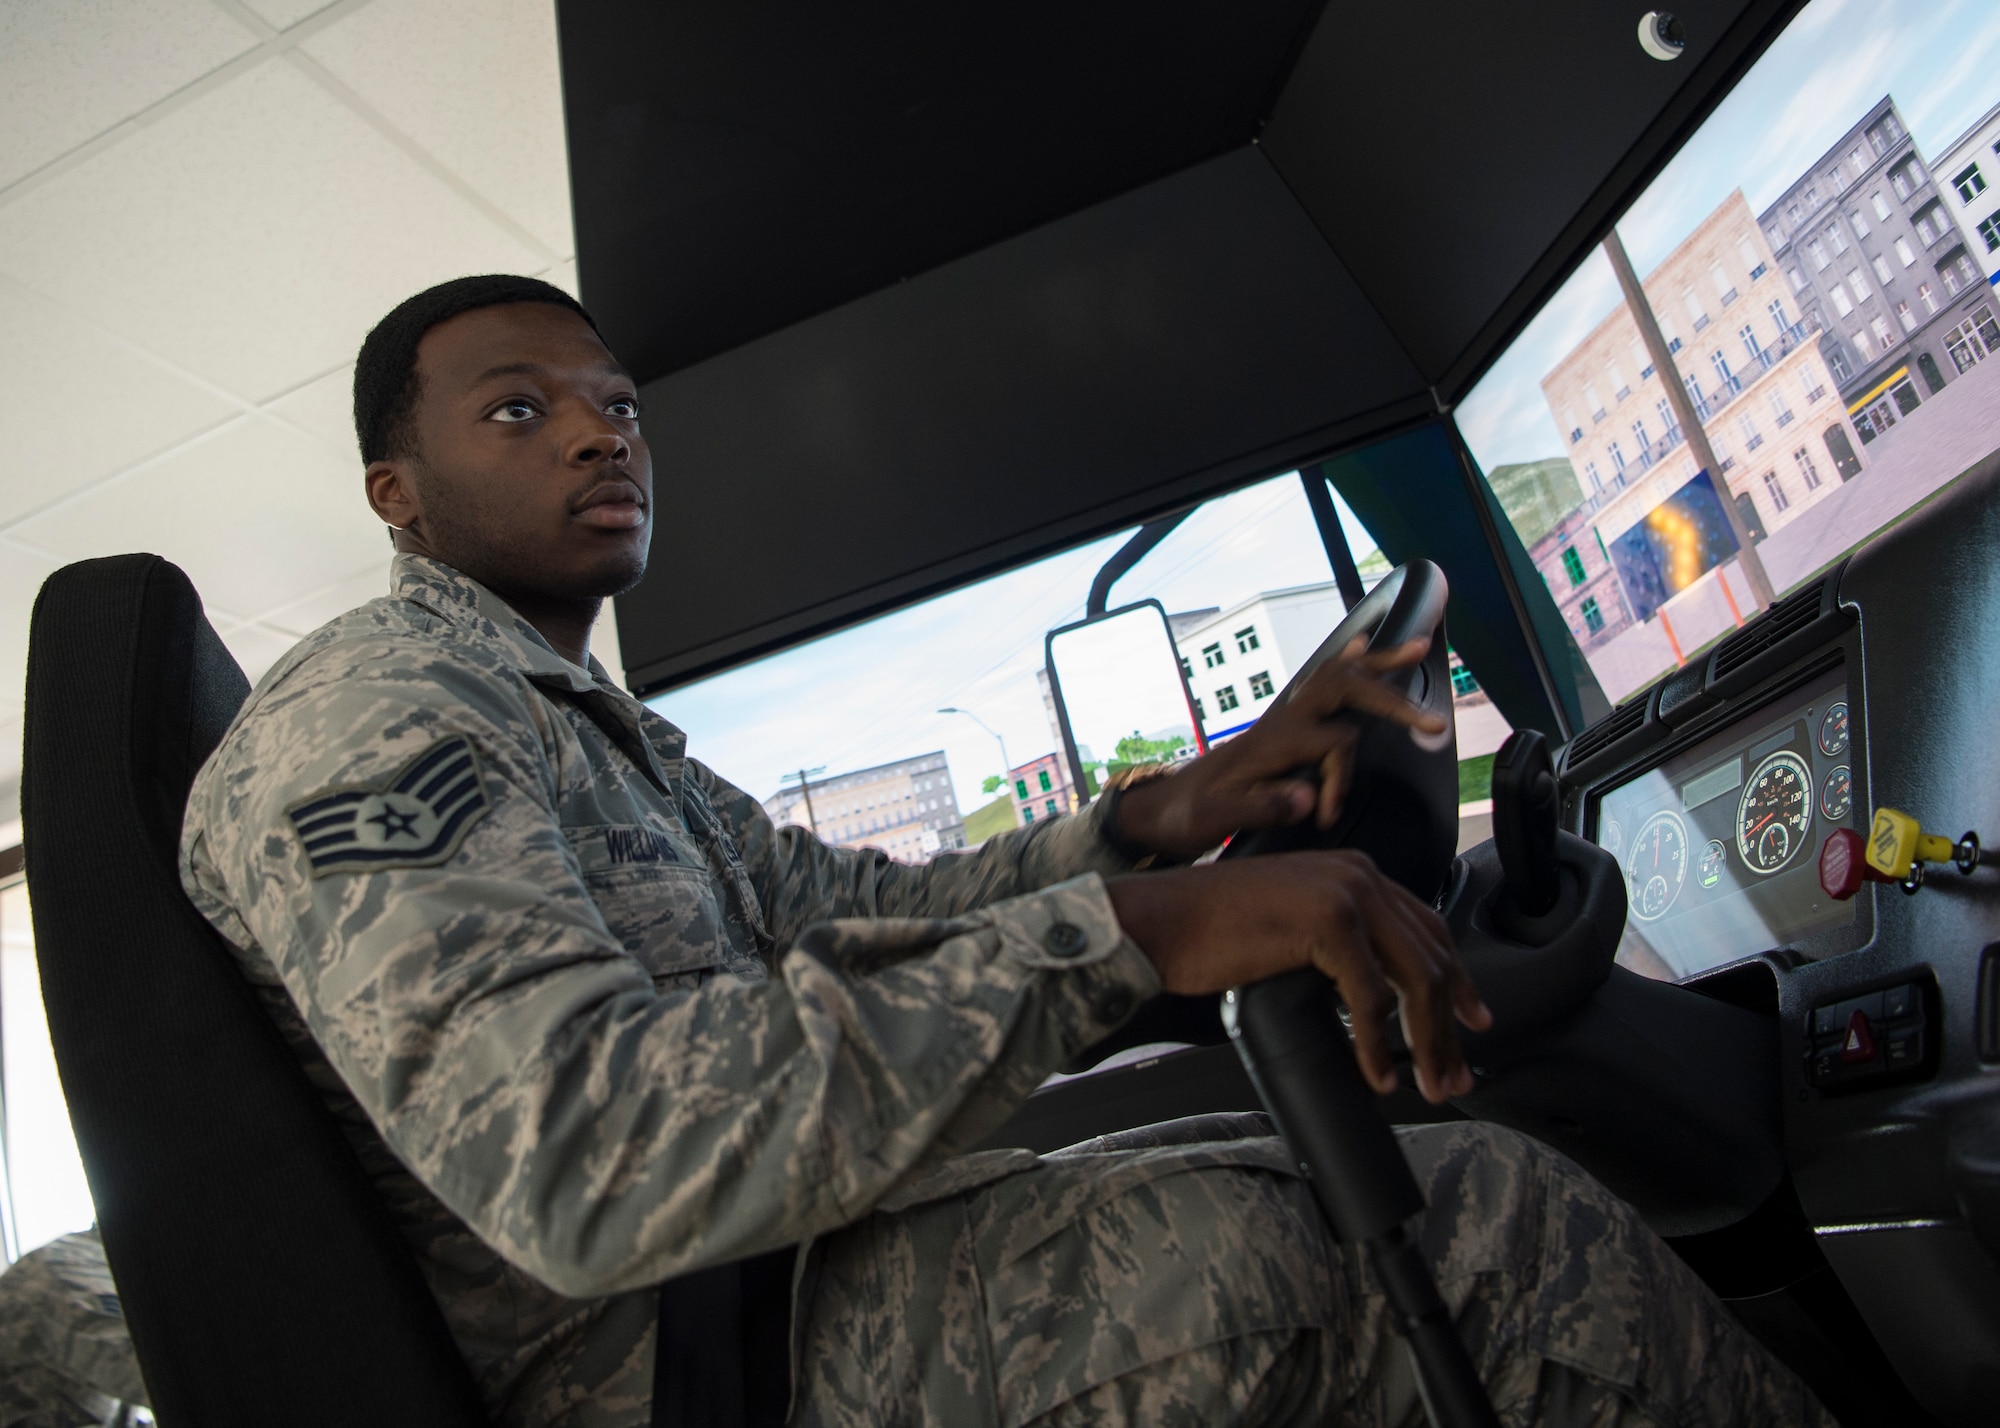 U.S. Air Force Staff Sgt. John Williams, 86th Vehicle Readiness Squadron assistant noncommissioned officer in charge of equipment support, turns on the 86th VRS’s new vehicle simulator at Ramstein Air Base, Germany, Aug 7, 2019.